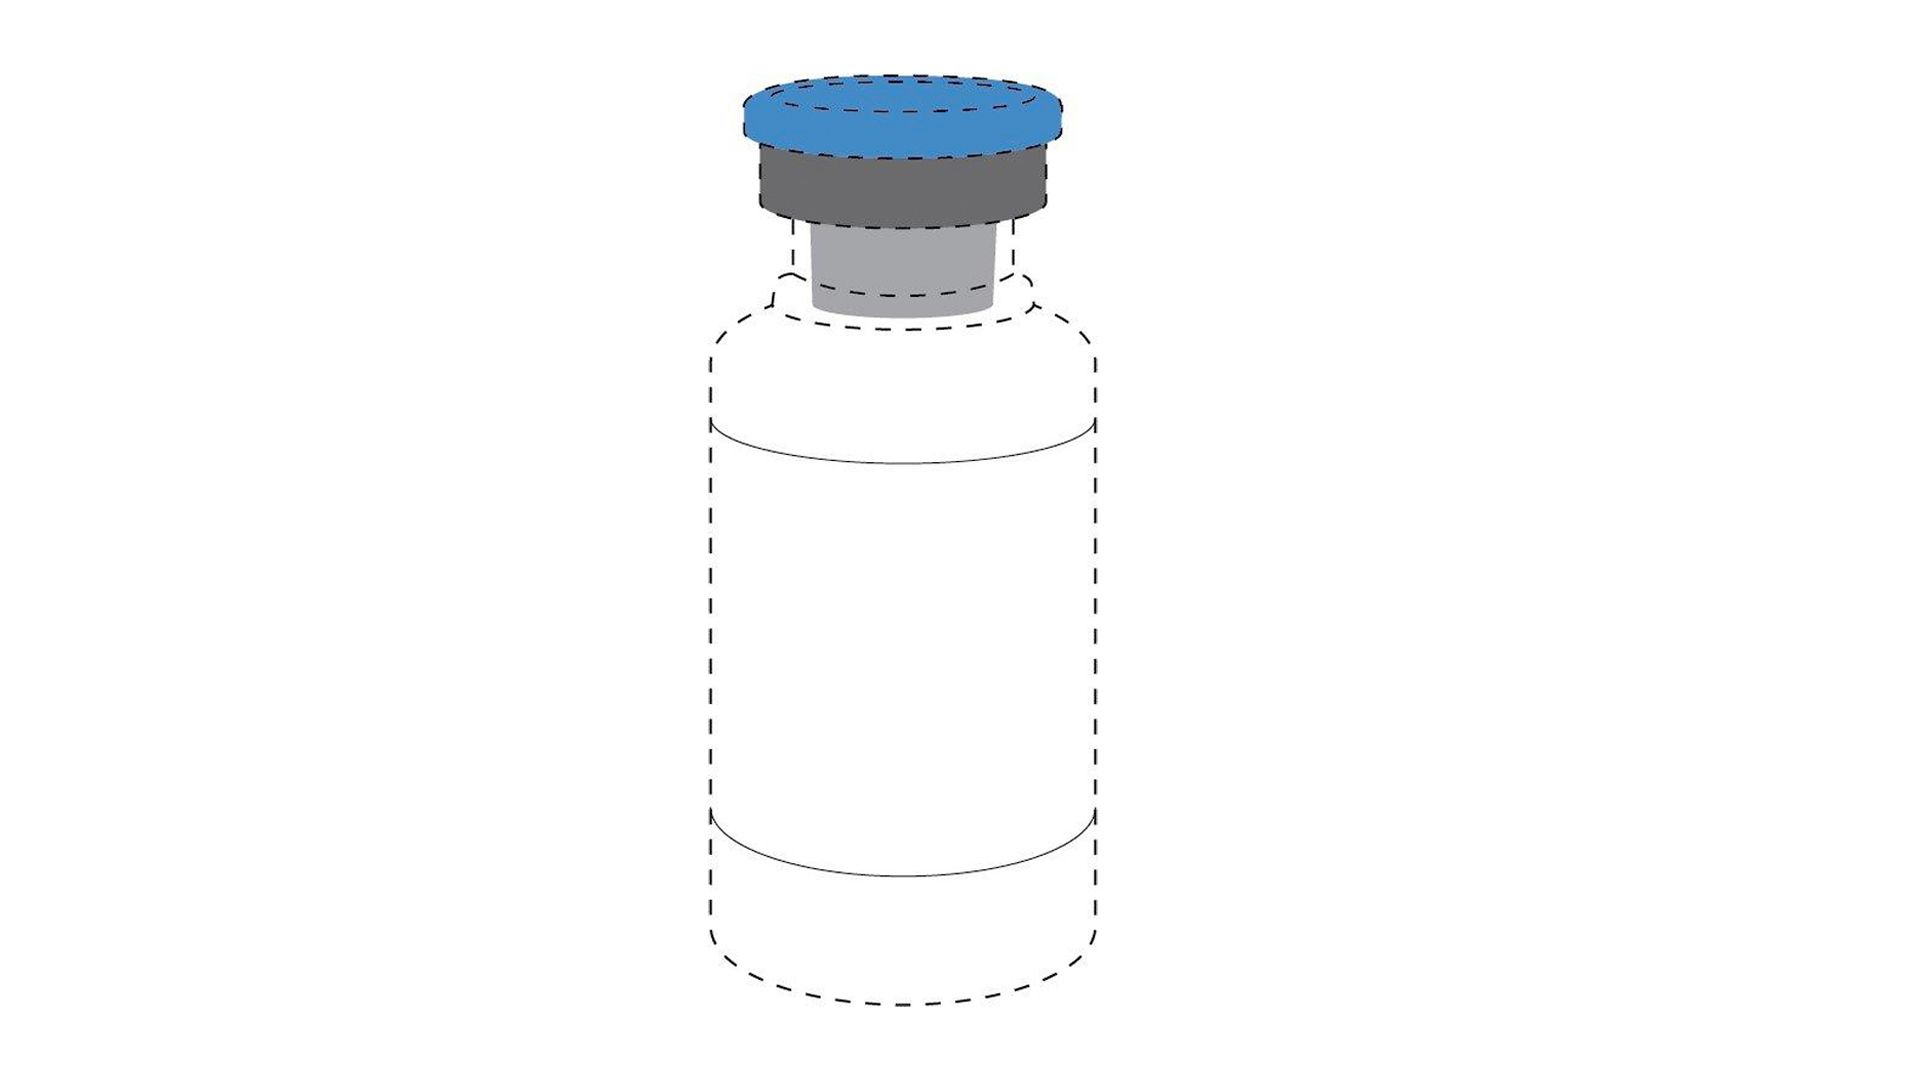 A drawing of an intravenous drug vial with a blue and gray top.